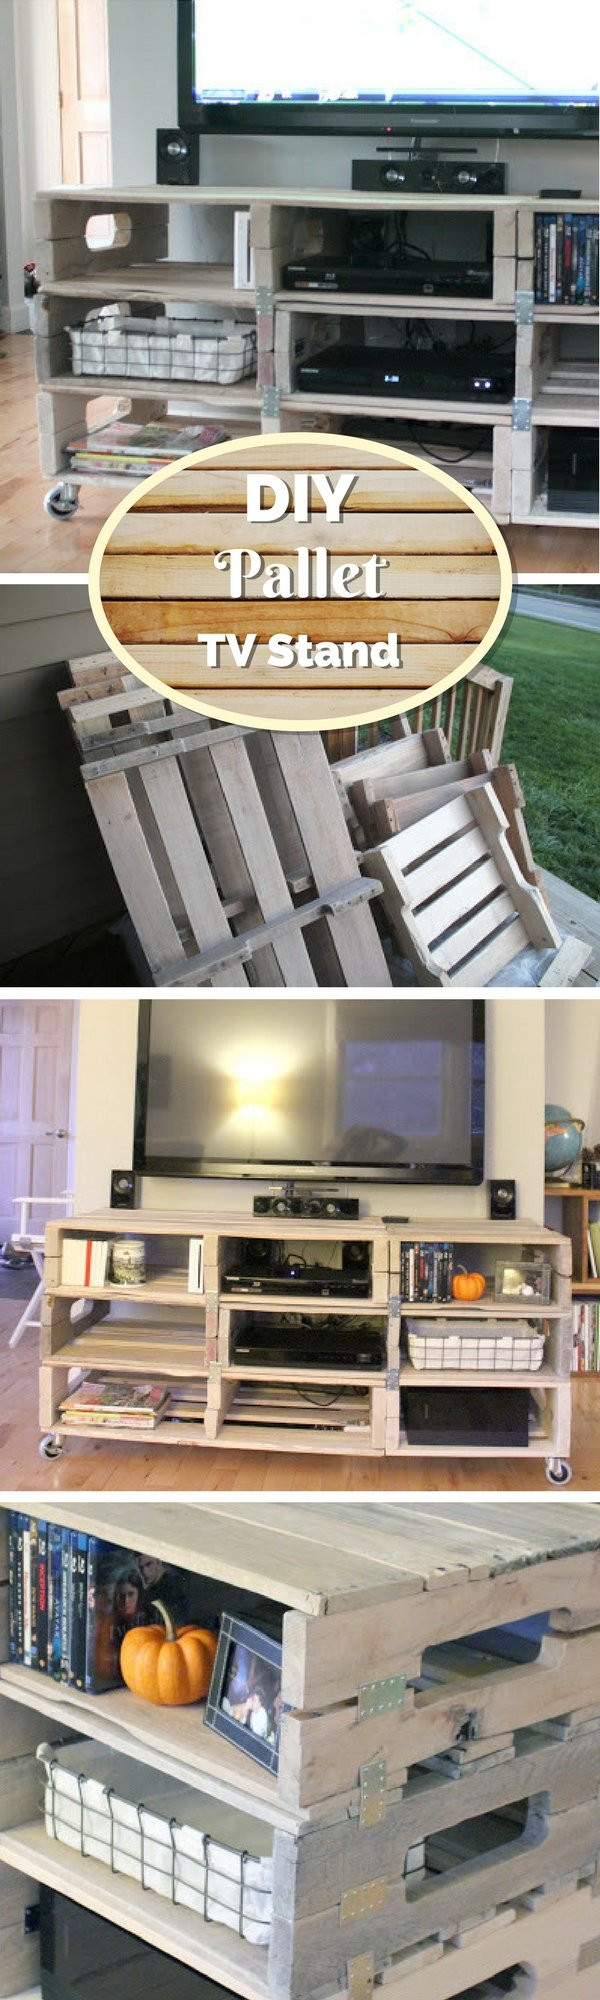 DIY Rustic Tv Stand Plans
 21 DIY TV Stand Ideas for Your Weekend Home Project